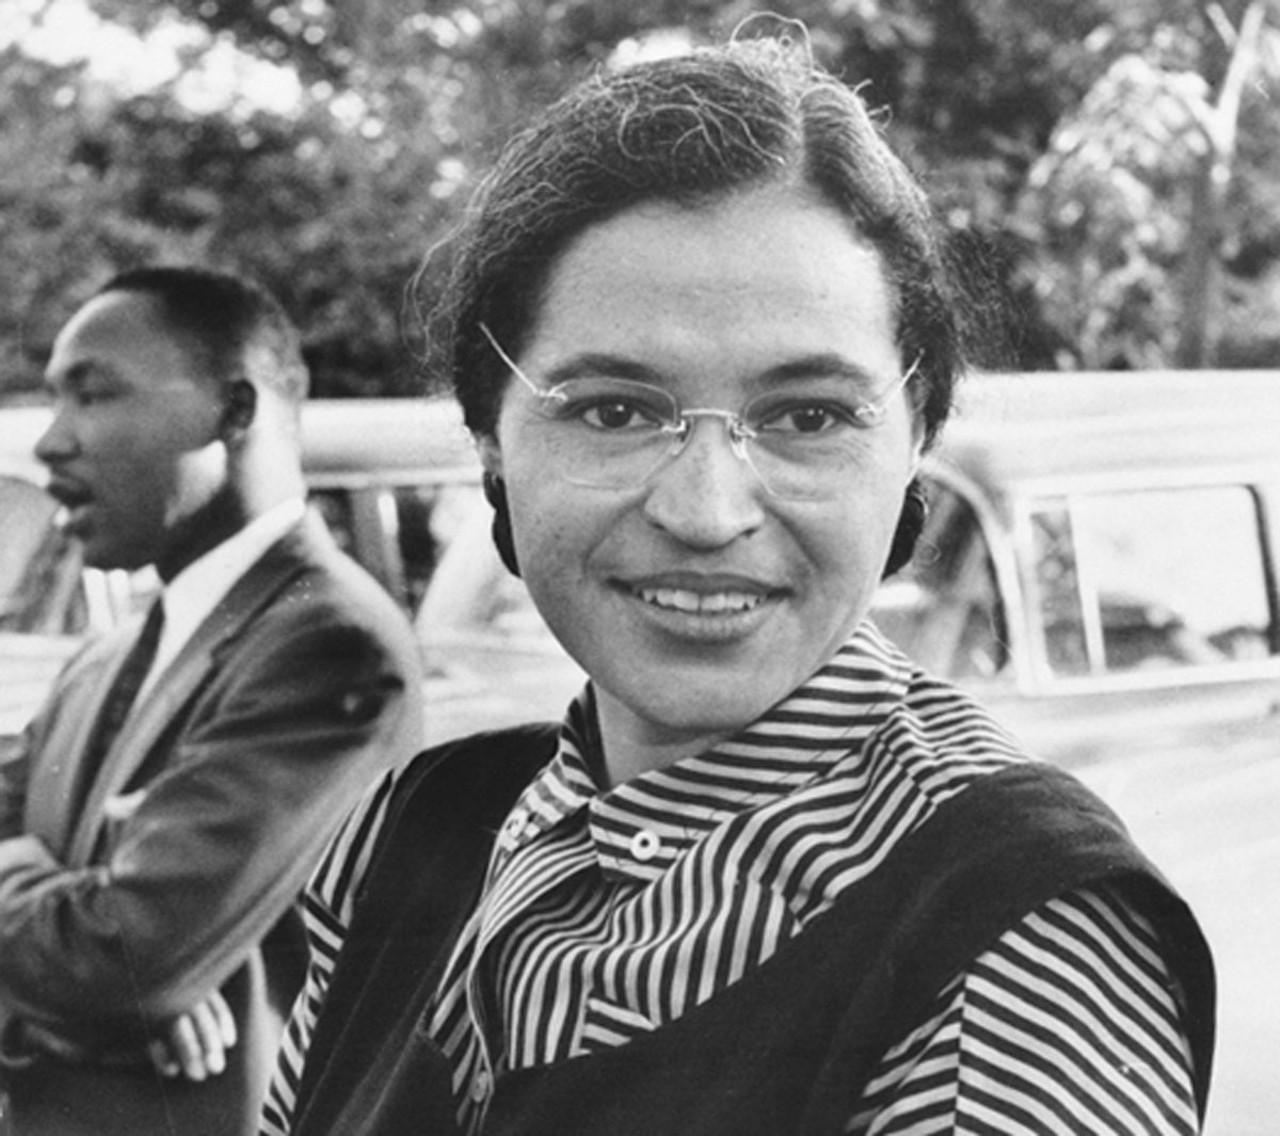 Rosa Parks
Following her pivotal role in the Montgomery bus boycott, civil rights activist Rosa Parks relocated to Detroit. Serving in U.S. Rep. John Conyers’s congressional office and later as a Planned Parenthood board member, Parks left a lasting legacy. When she died in 2005, Parks was buried in Detroit’s Woodlawn Cemetery.